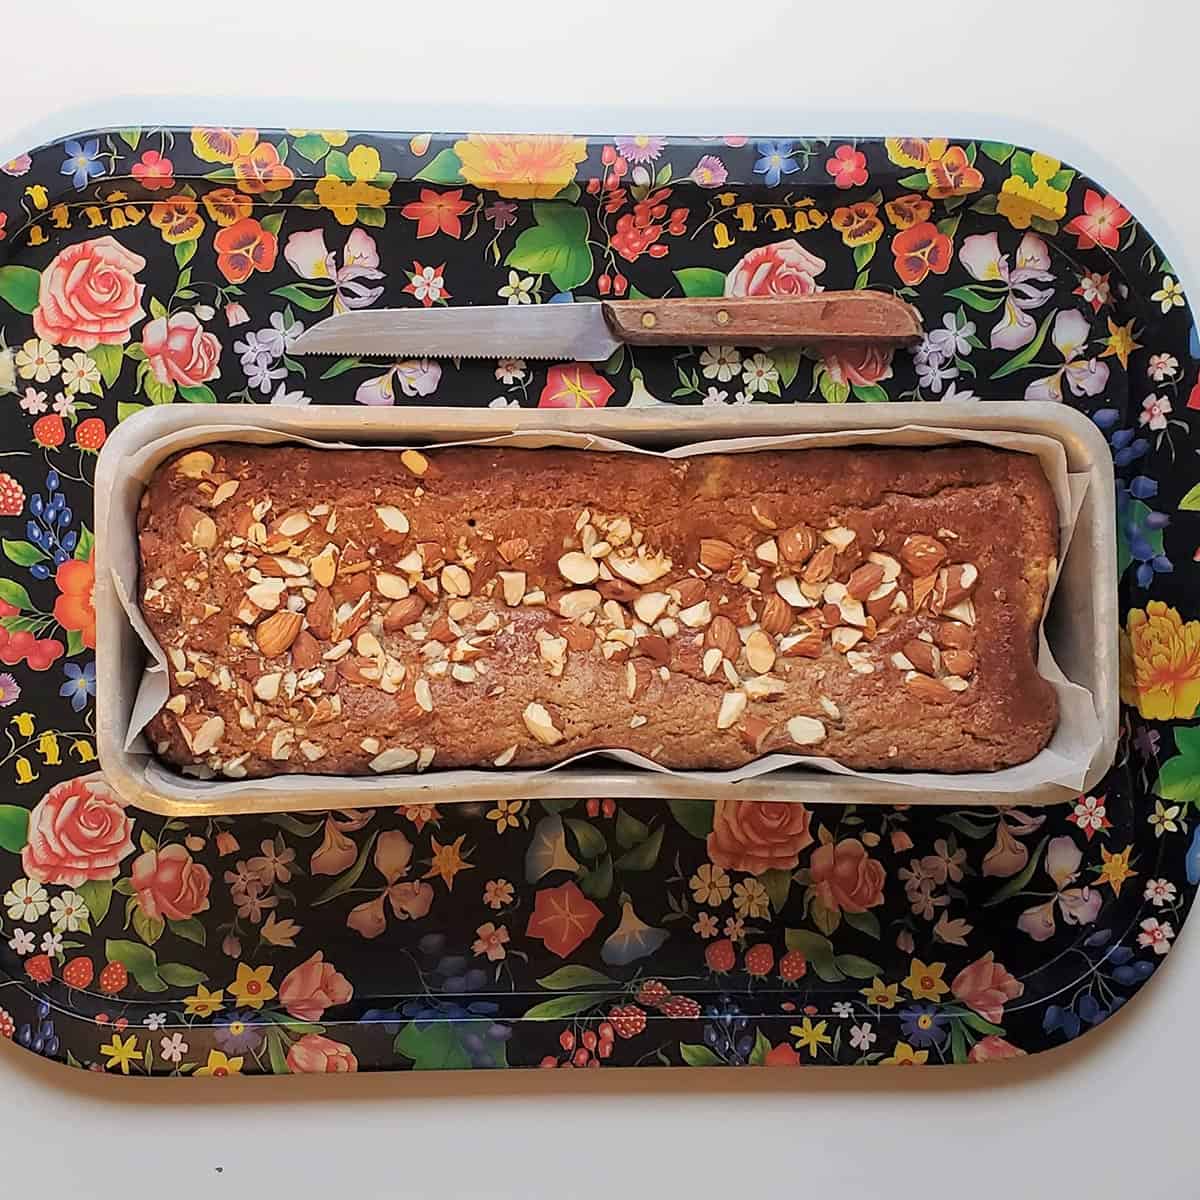 https://www.pregnancyeats.com/wp-content/uploads/2021/12/Finished-Banana-and-Almond-Cake-On-Tray-1200x1200-1.jpg